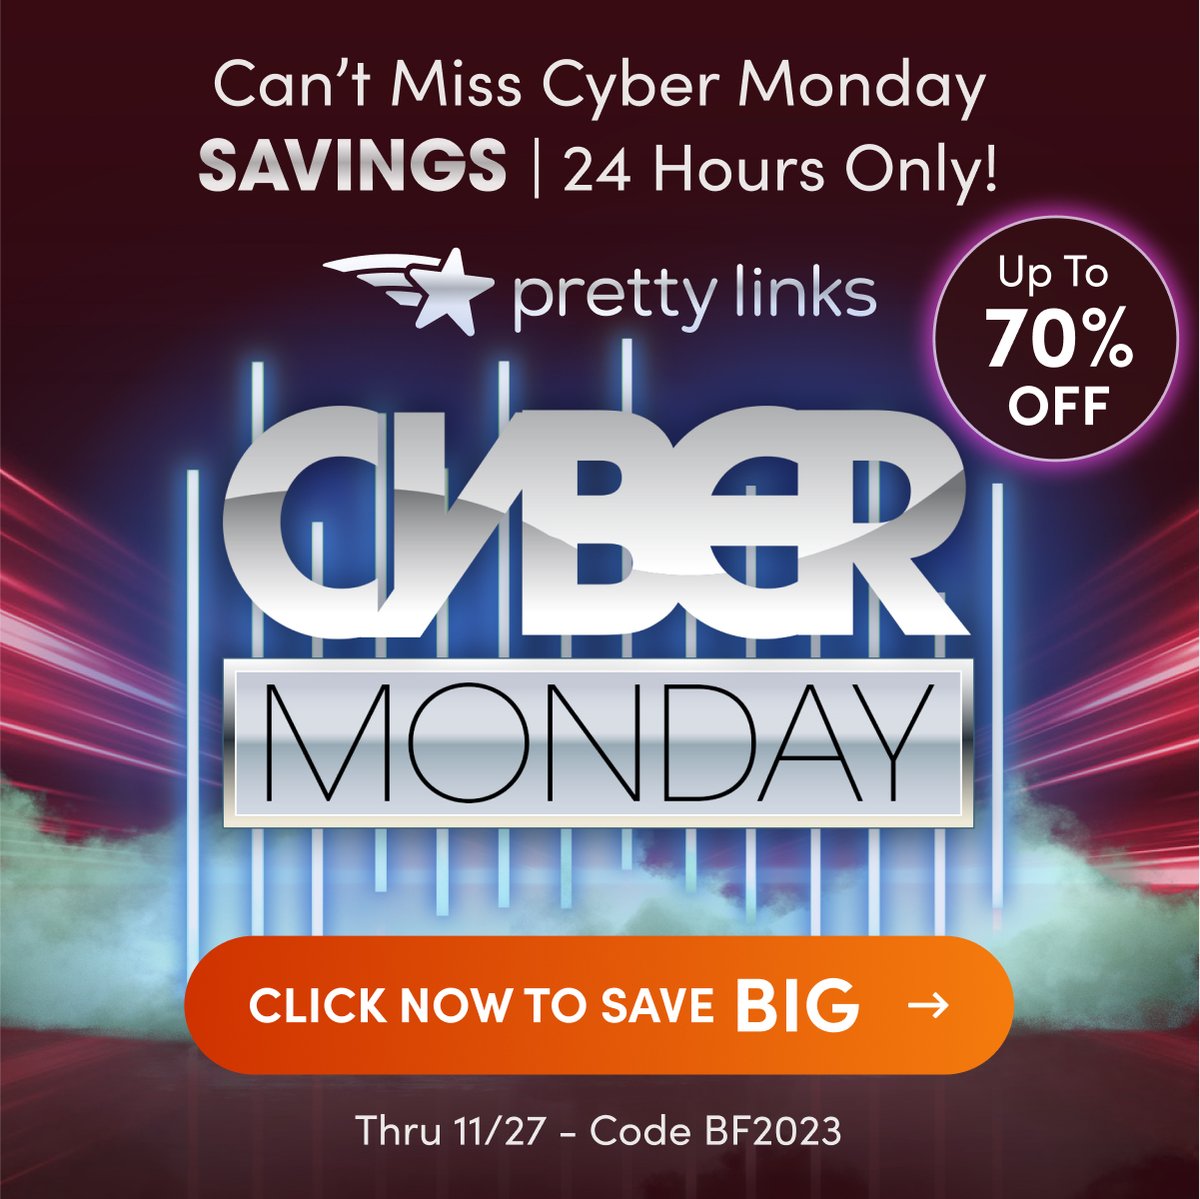 It's #CyberMonday crunch time! Only hours left to get up to 70% off Pretty Links. Don't miss out! Use BF2023 before 11:59 EST 👉 prettylinks.com/black-friday-2…

#LinkManagement #AffiliateLinks #AffiliateMarketing #WordPressTools #BlackFriday  #MarketingStrategy #CyberMondayShopping